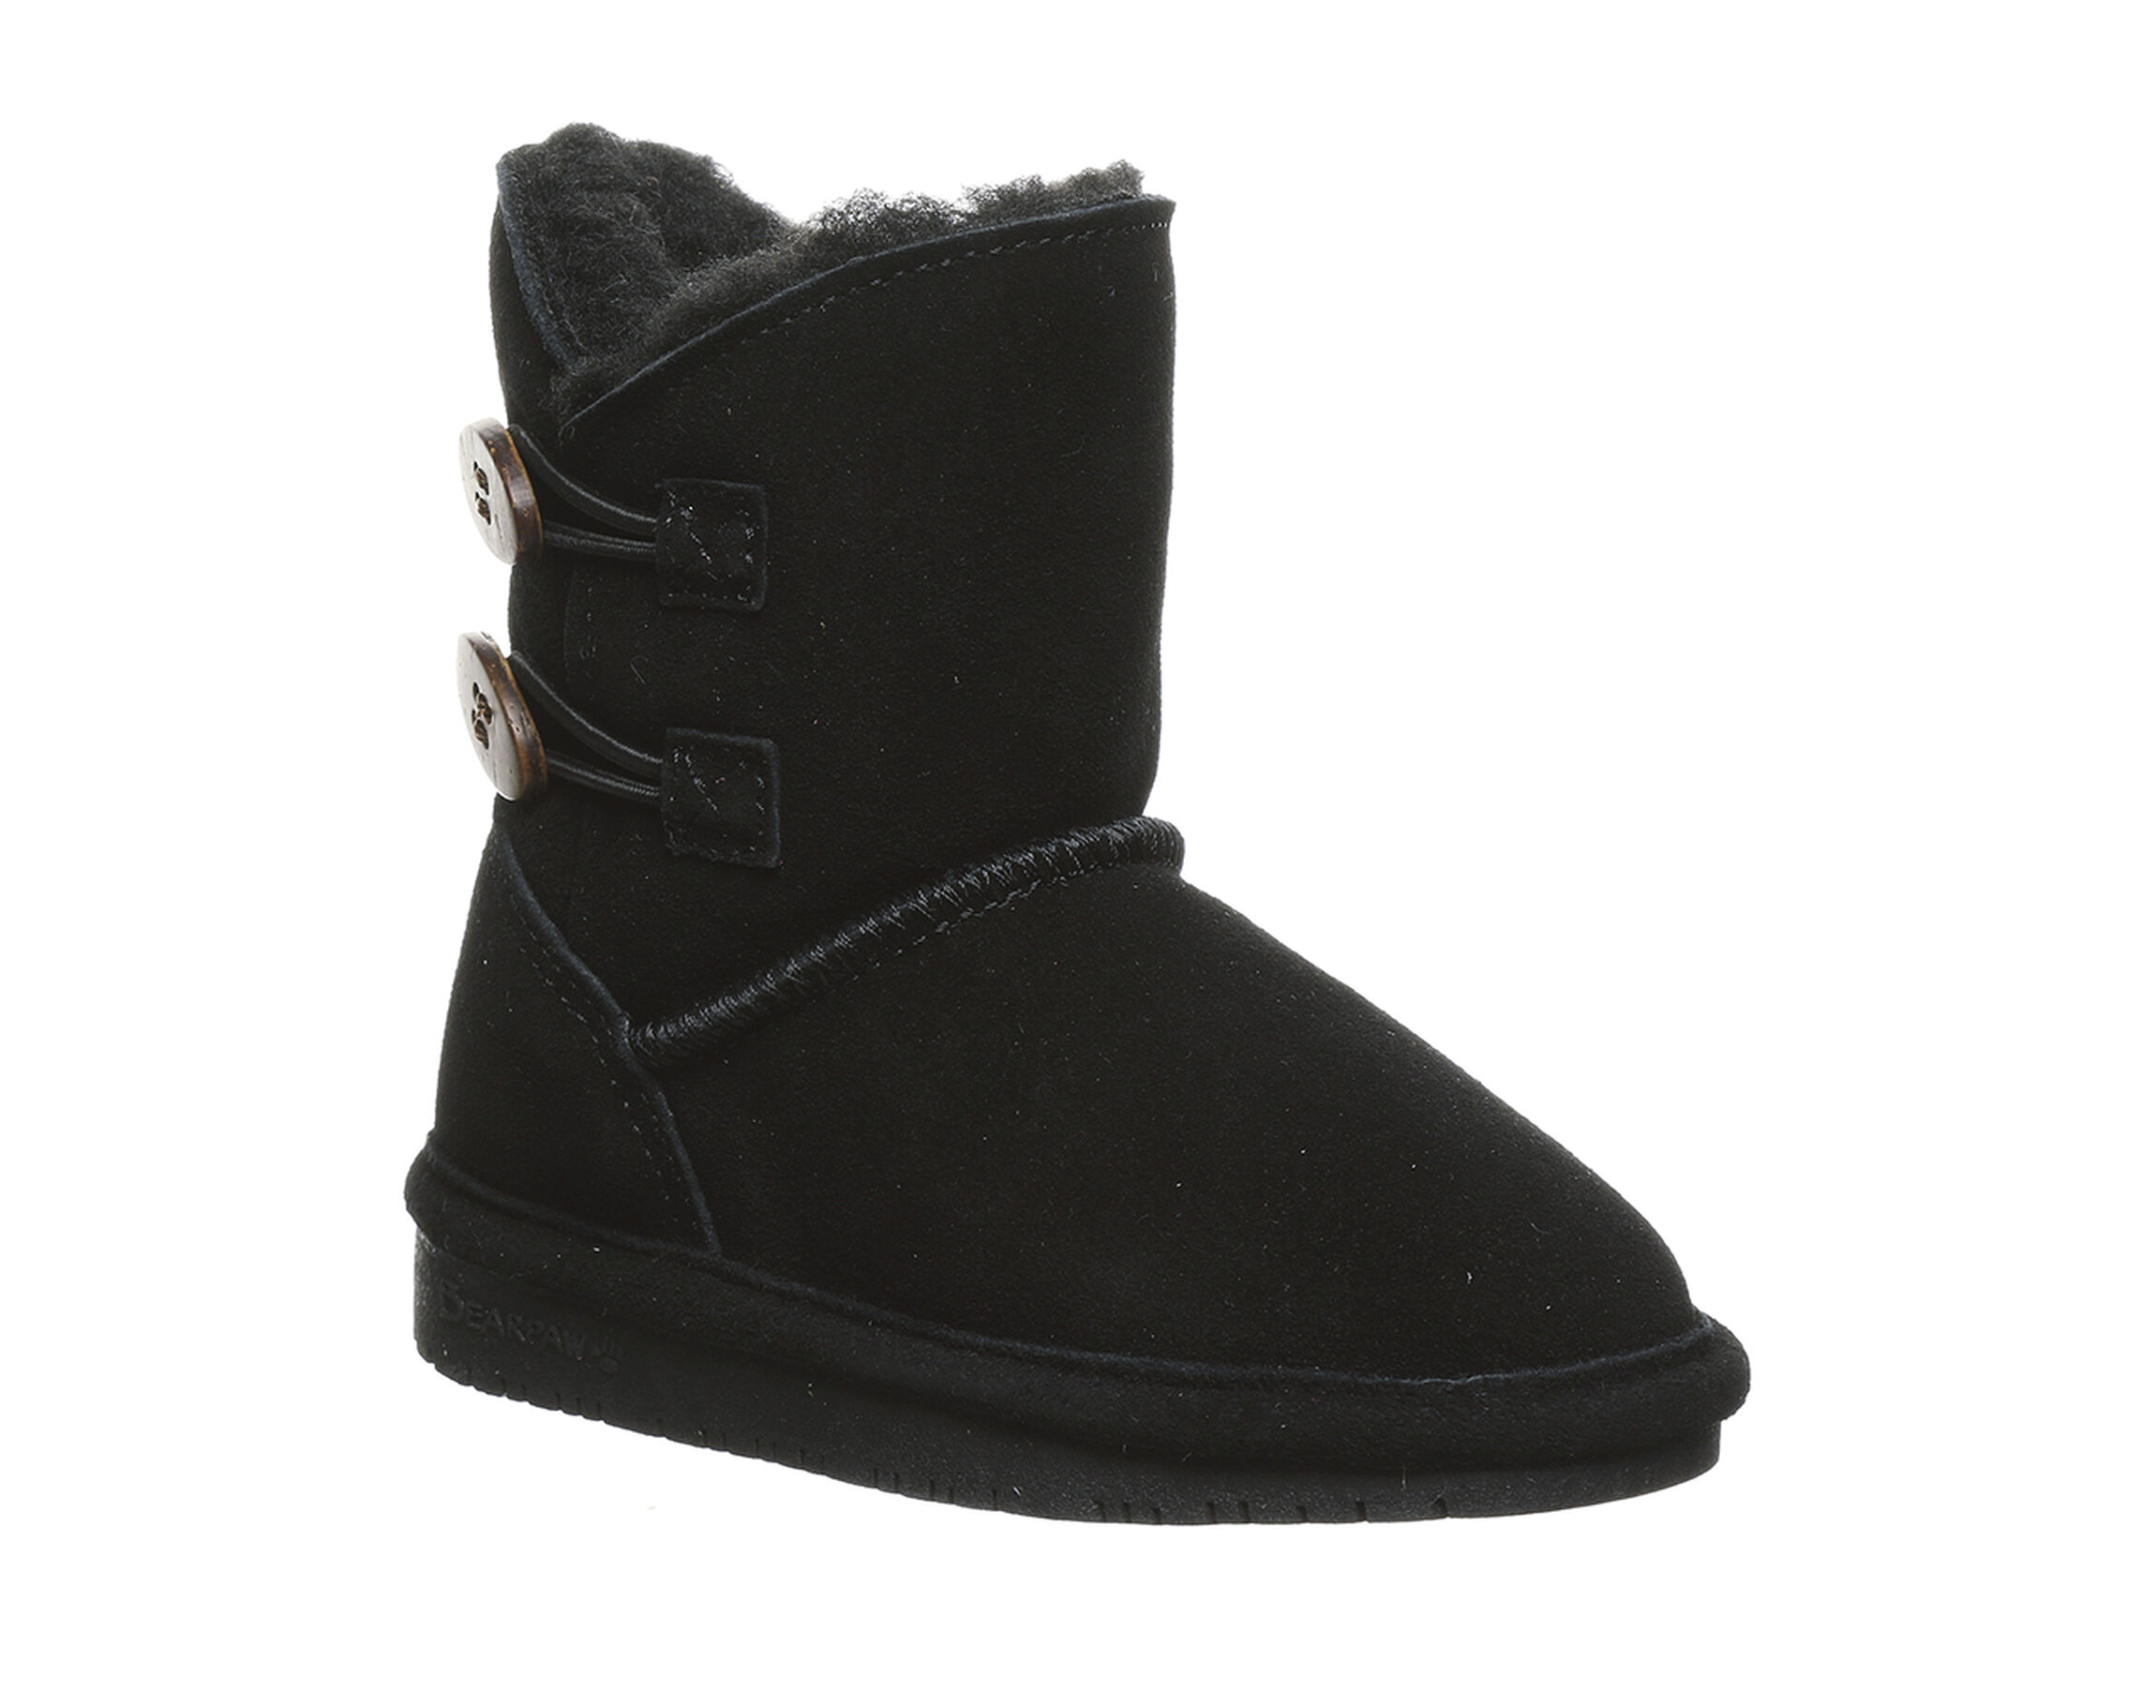 Bearpaw Boots, Slippers, Sandals, and More | Shoe Carnival